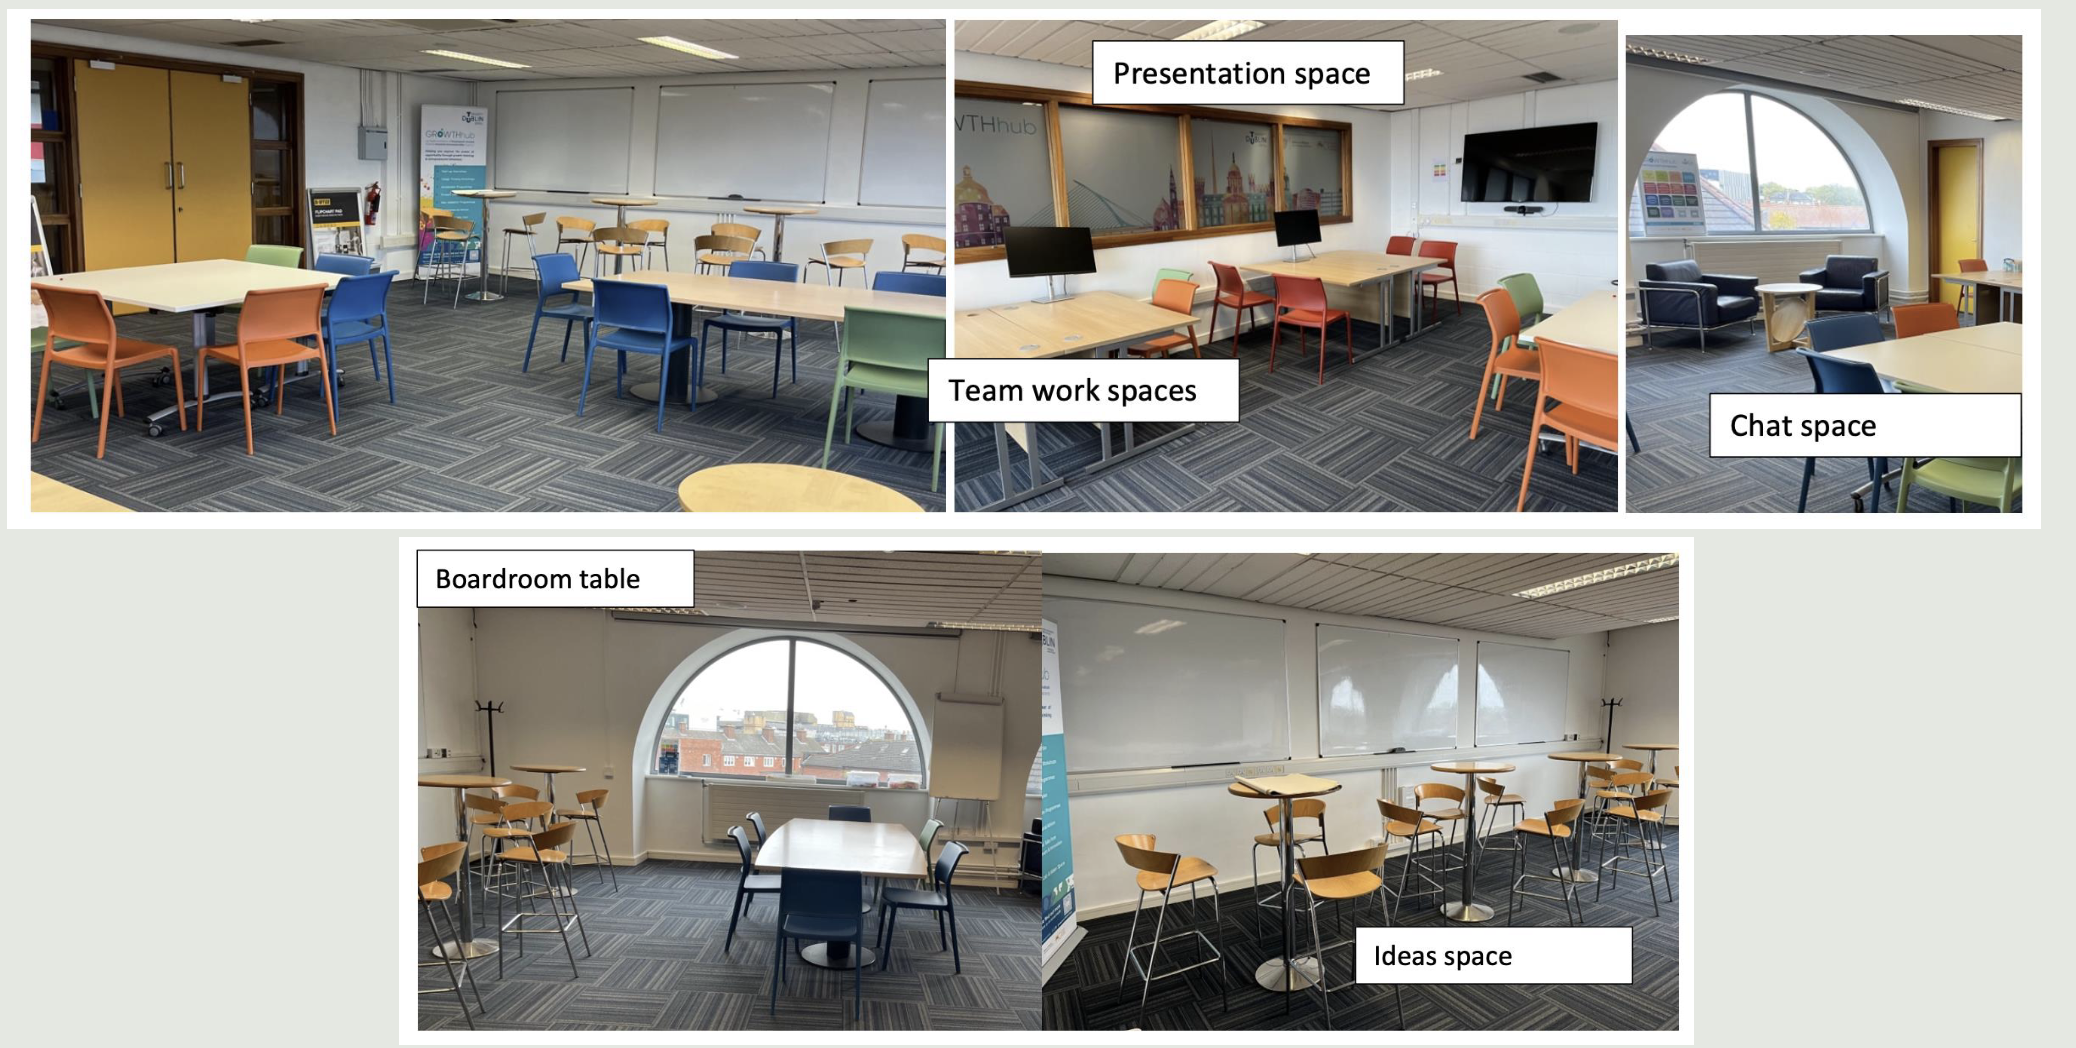 Images of the spaces in the Ideation lab like the tables and chairs location